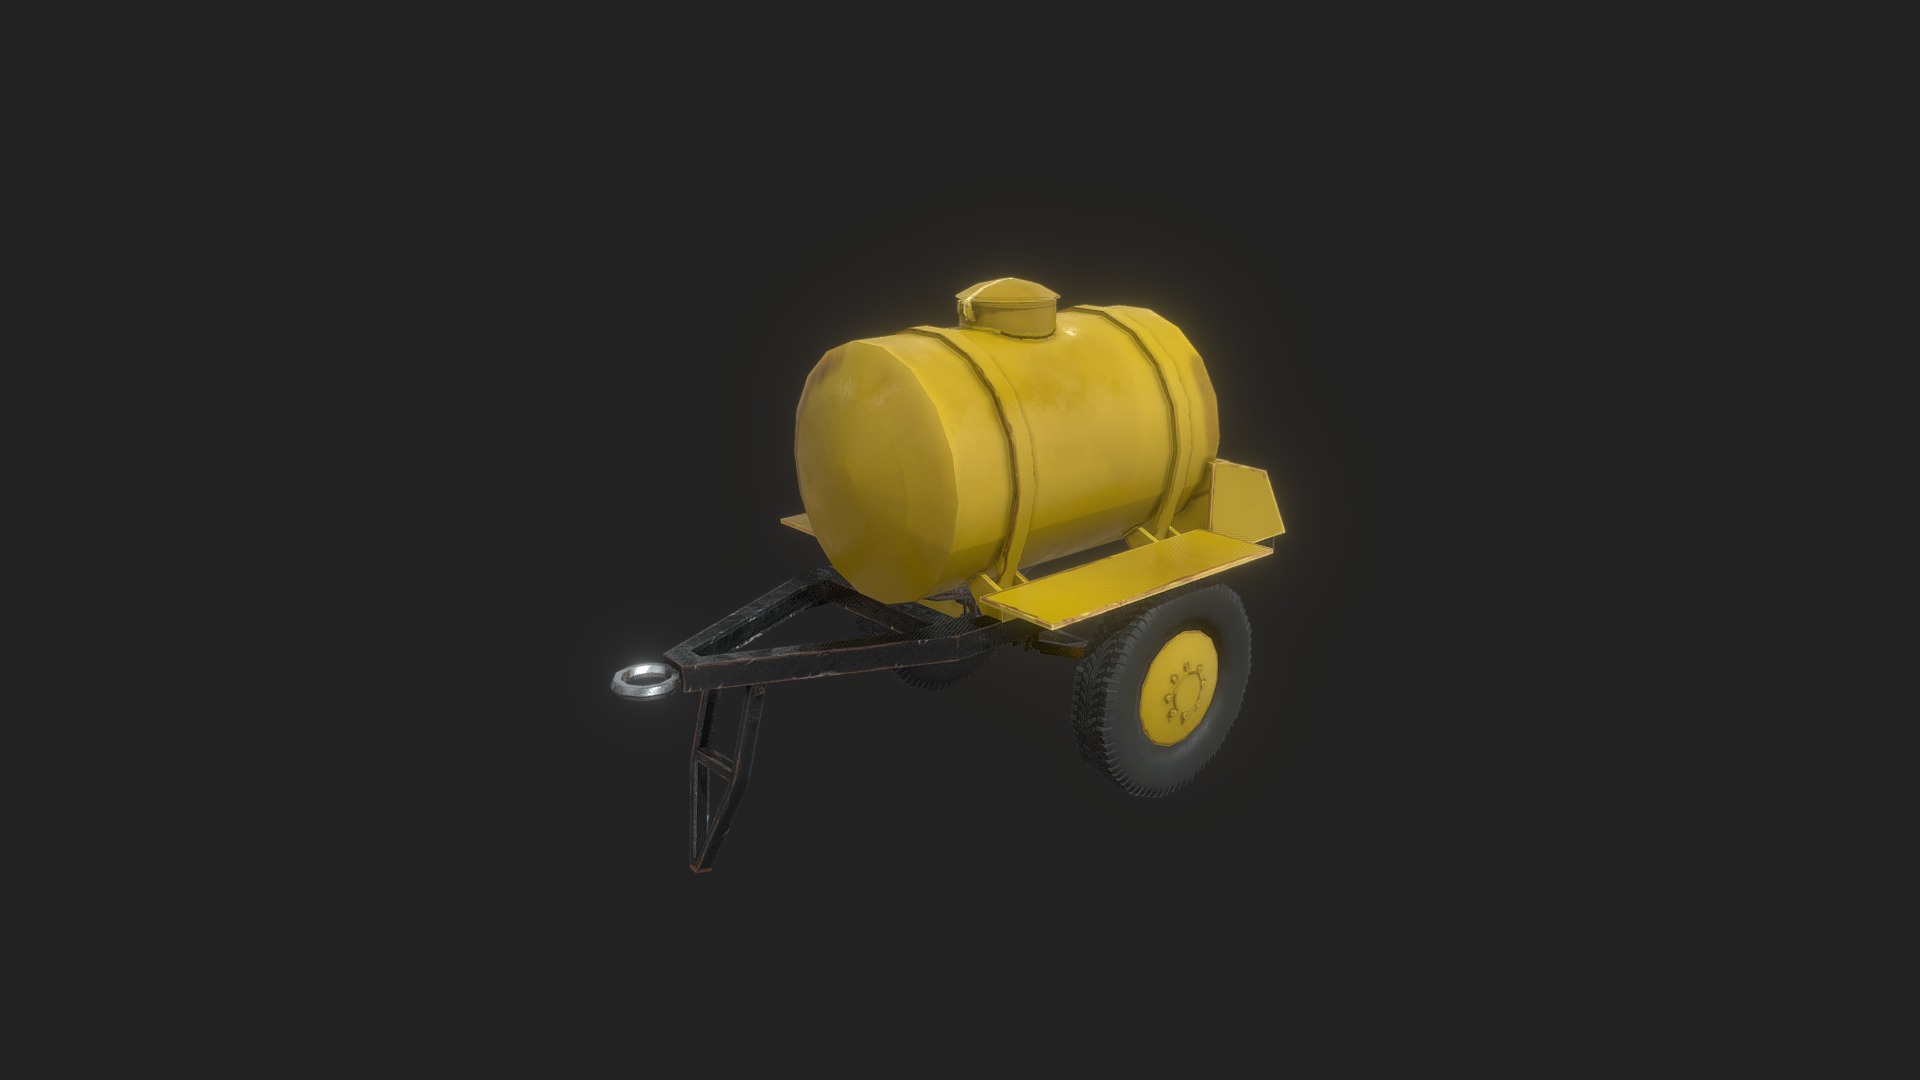 3D model barrel with kvass - This is a 3D model of the barrel with kvass. The 3D model is about a yellow and black machine.